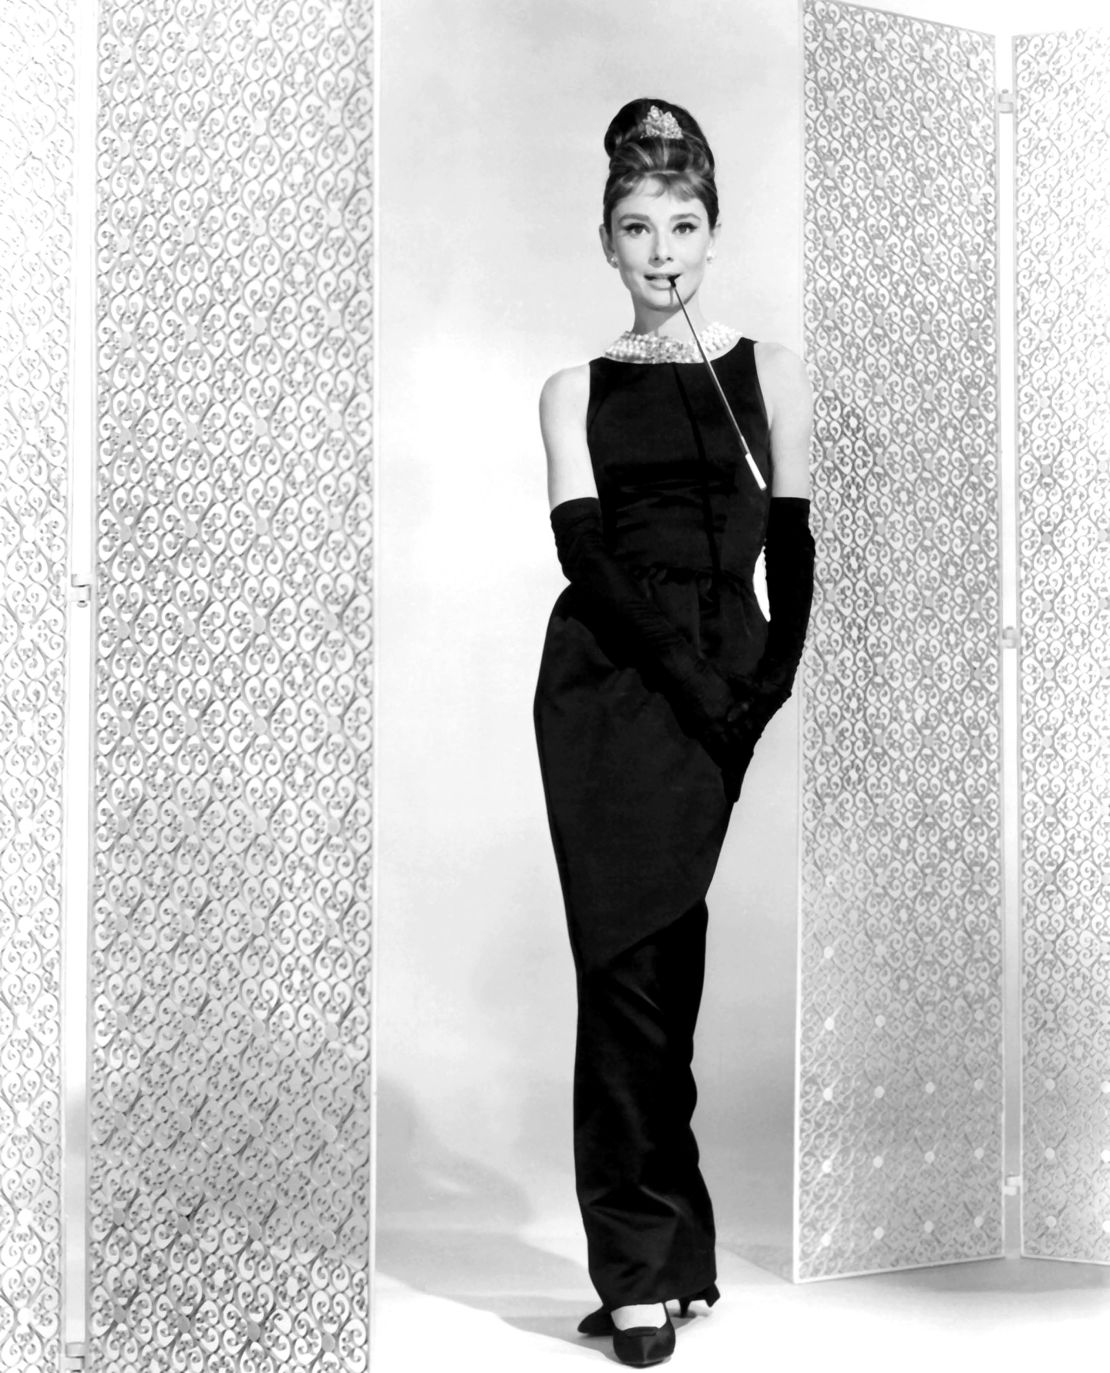 Audrey Hepburn Style: These Audrey Hepburn Style Moments Are